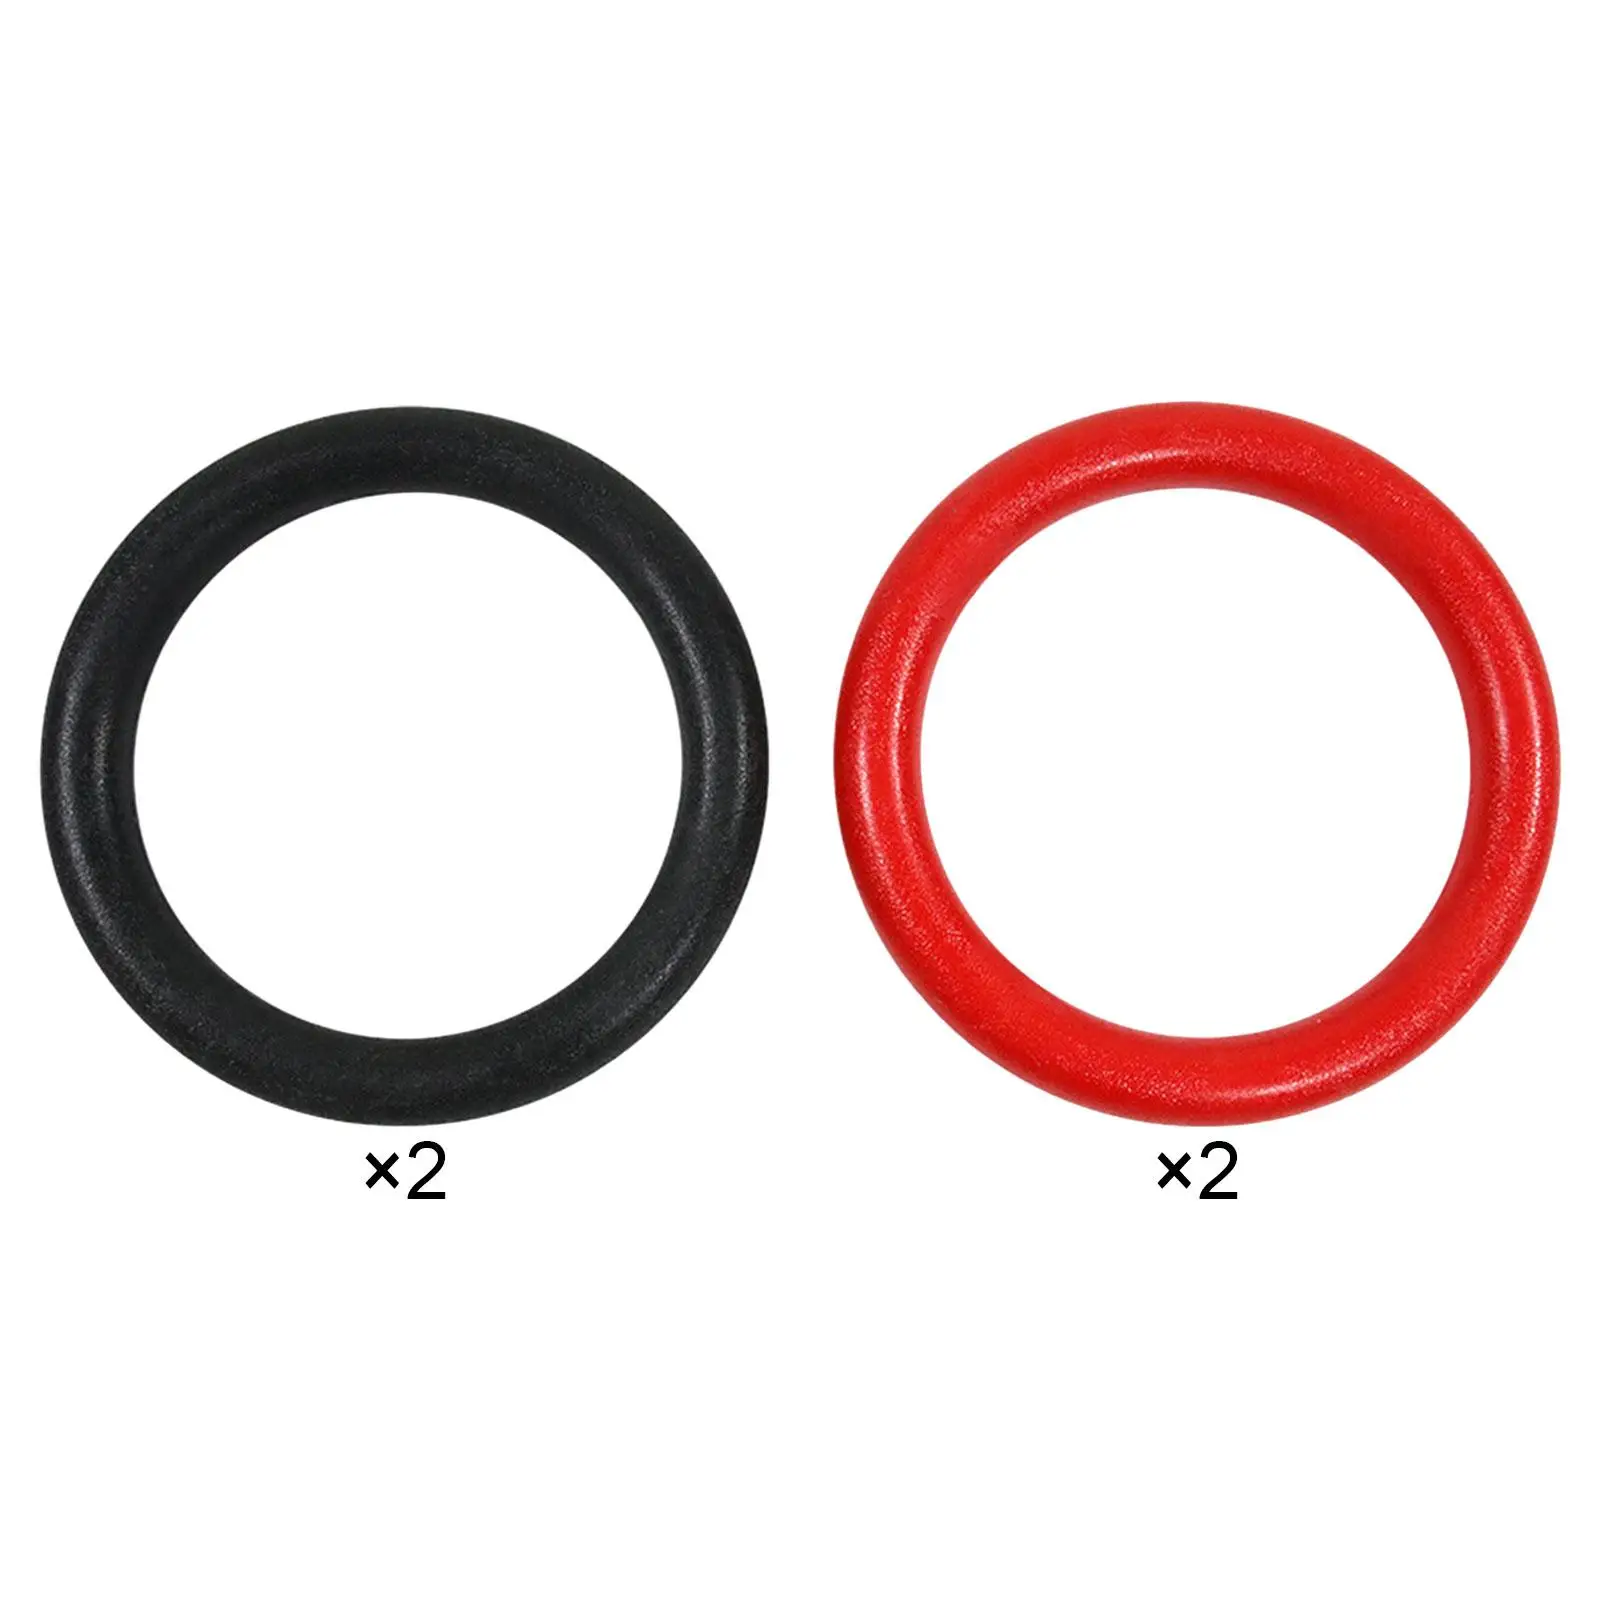 2x Gymnastics Rings for Men Women Strength Training Pull up Exercise Rings for Fitness Equipment Home Gym Full Body Workout